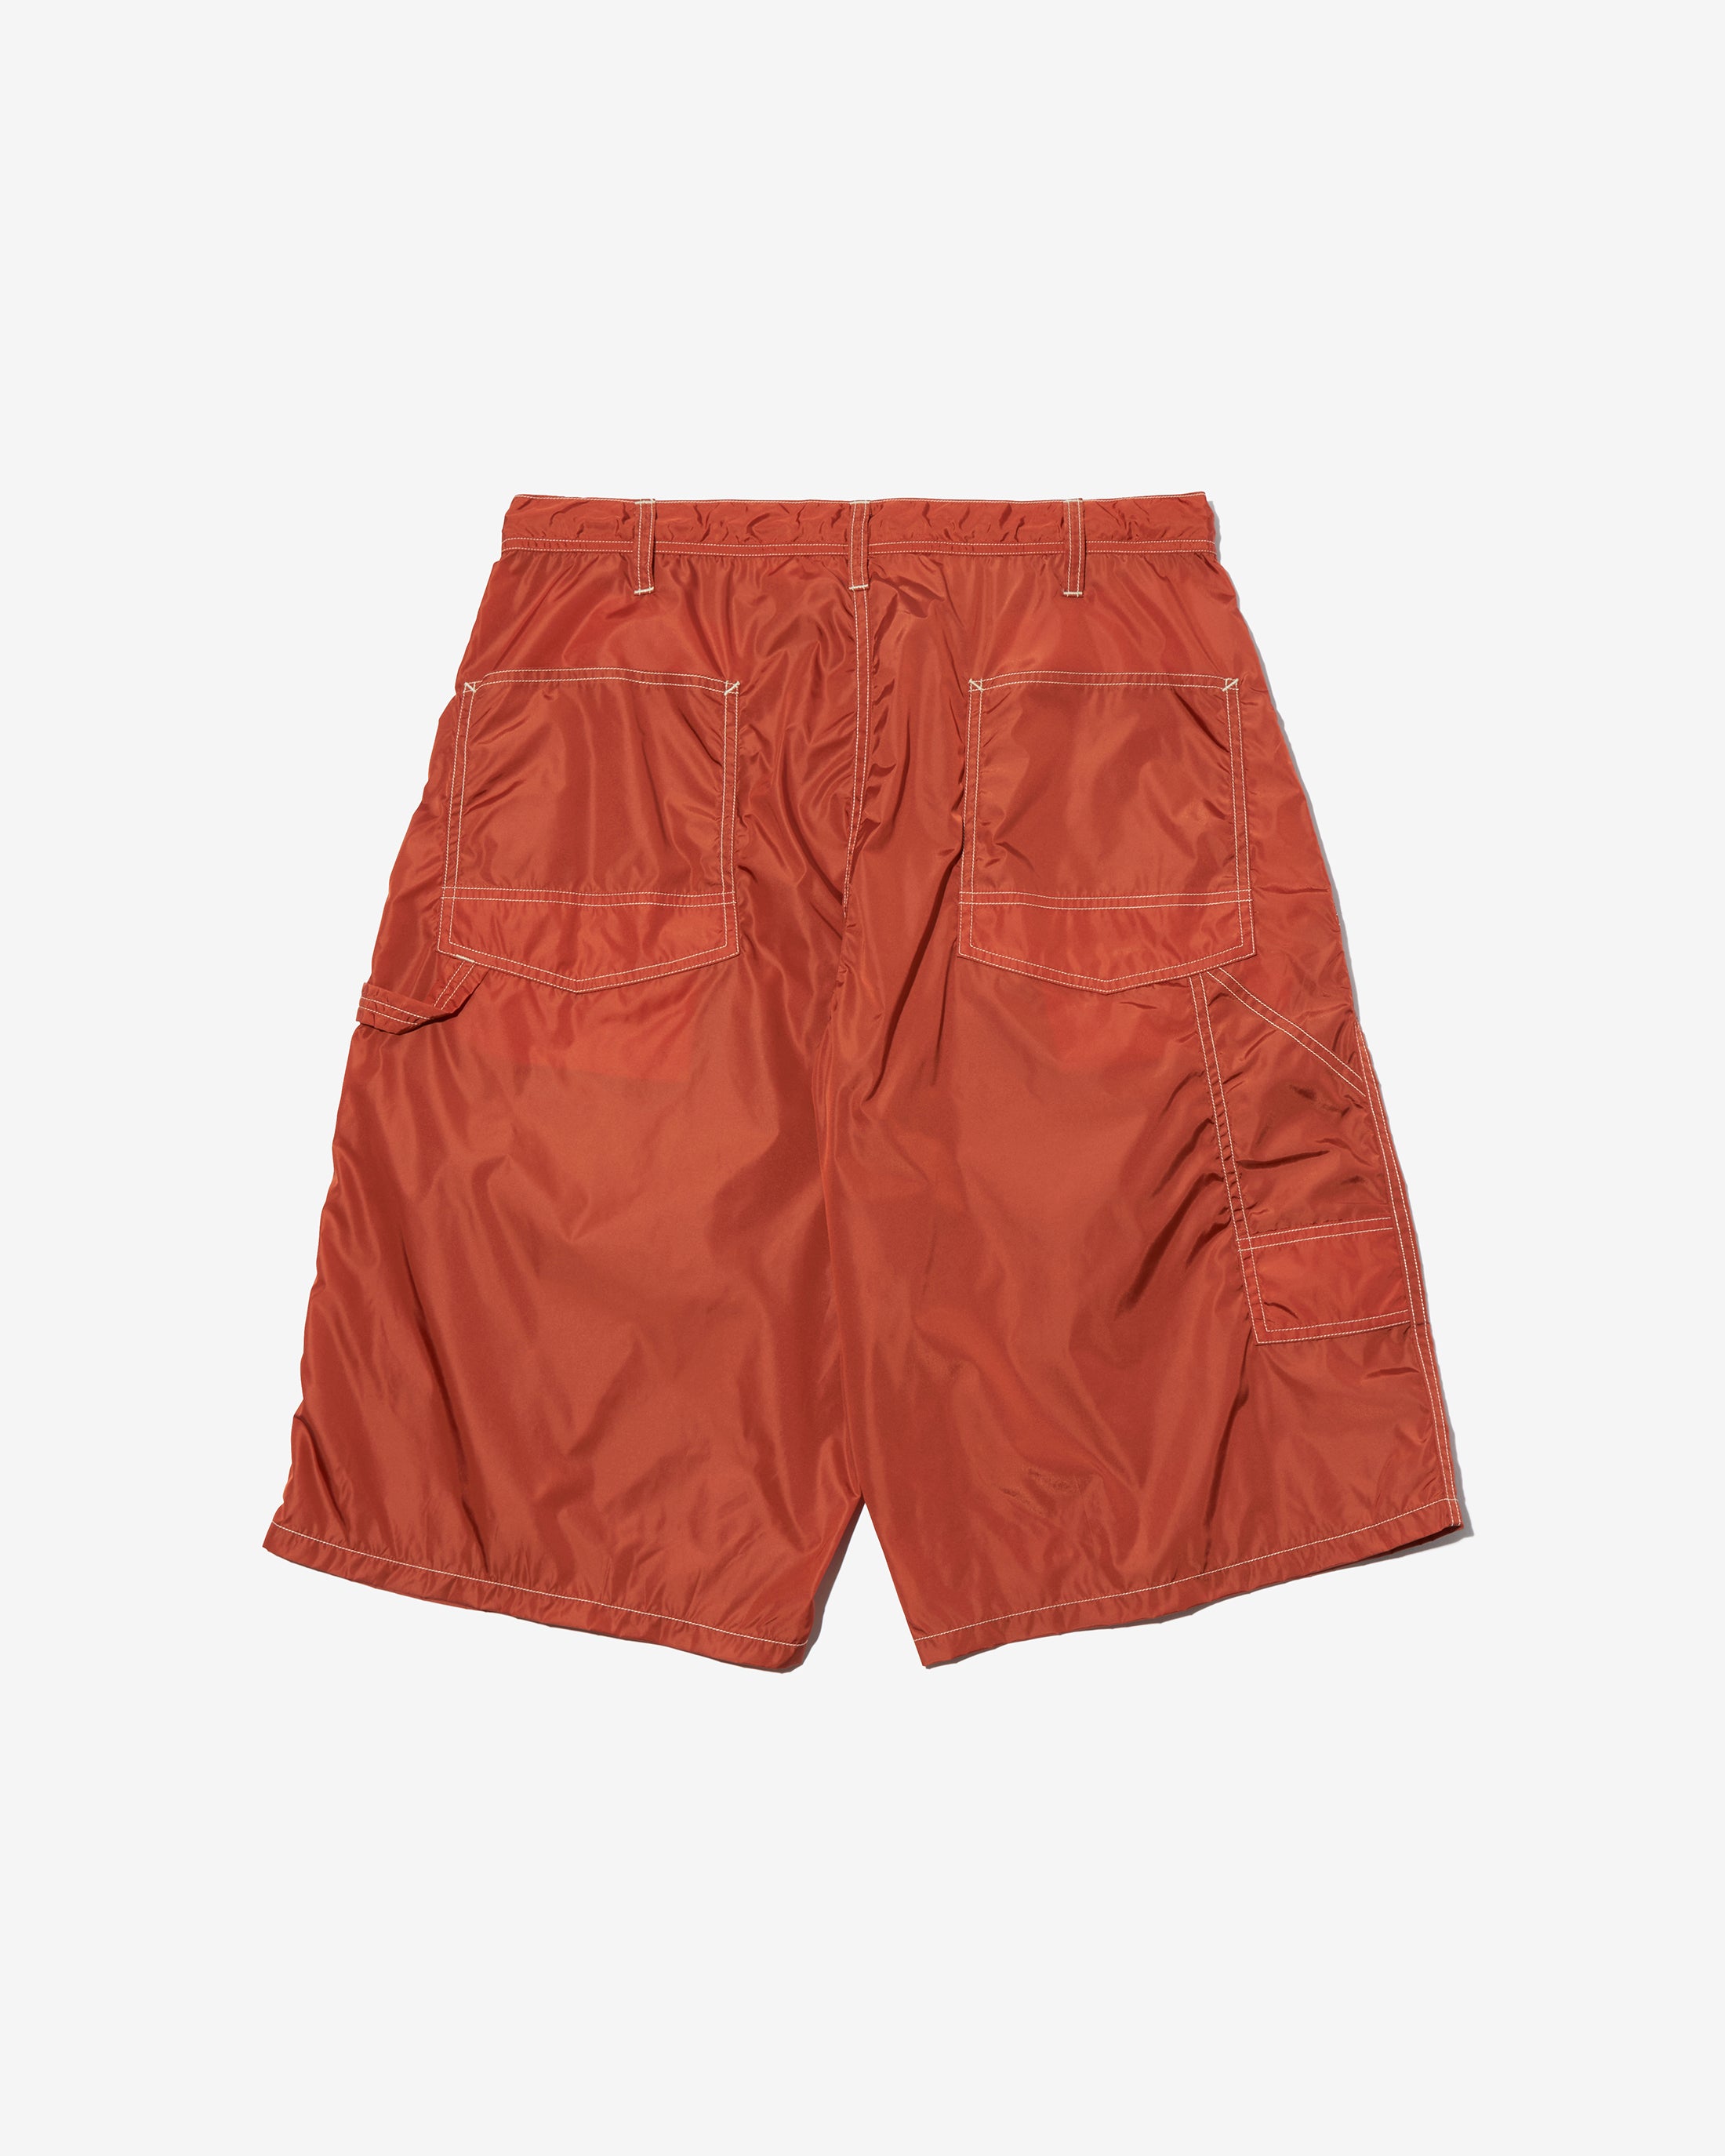 1000s thousands / PAINTER BAGGY SHORTS - BRICK RED